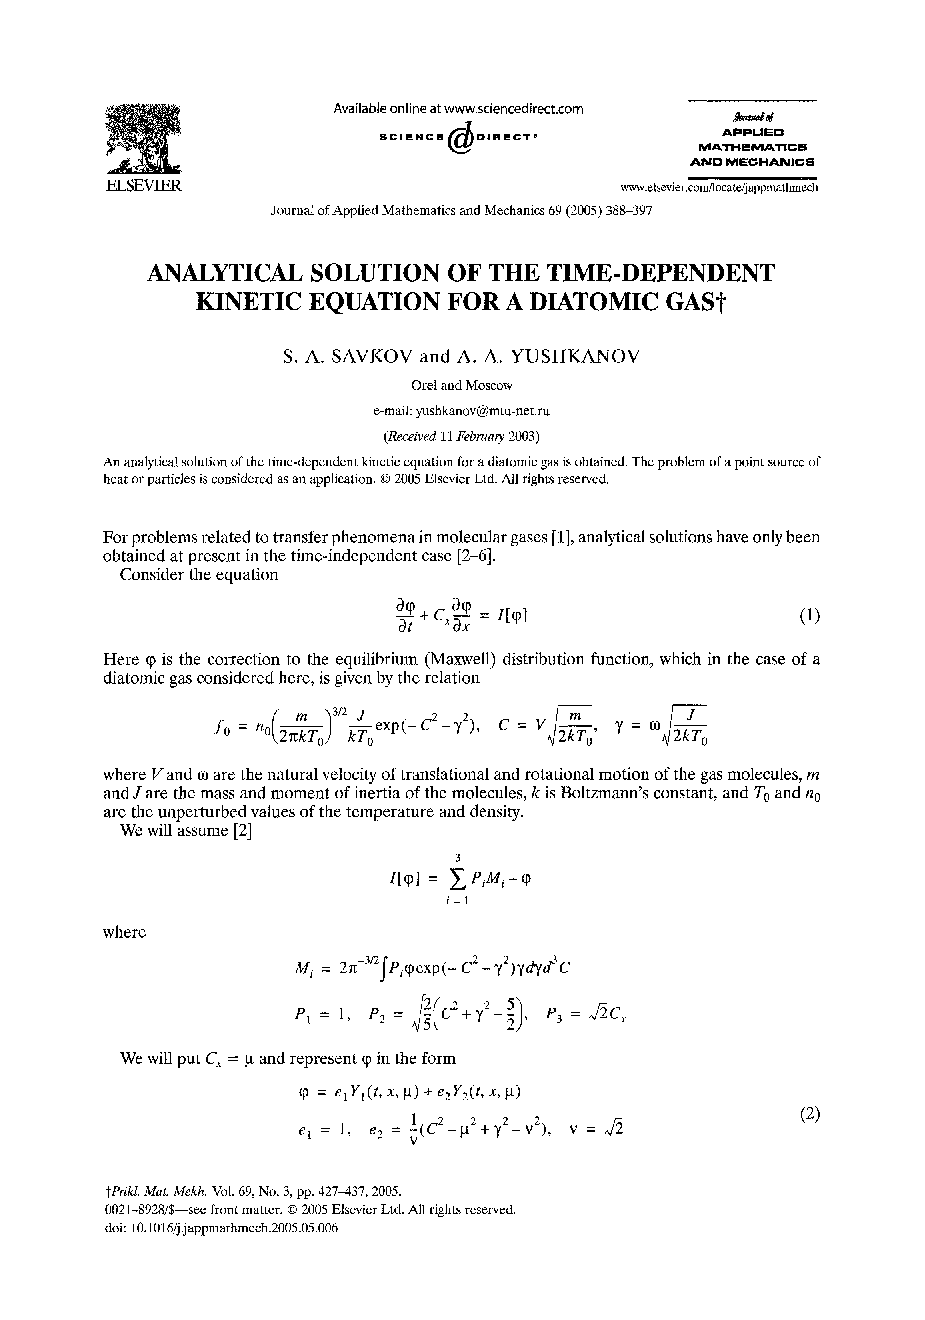 Analytical solution of the time-dependent kinetic equation for a diatomic gas